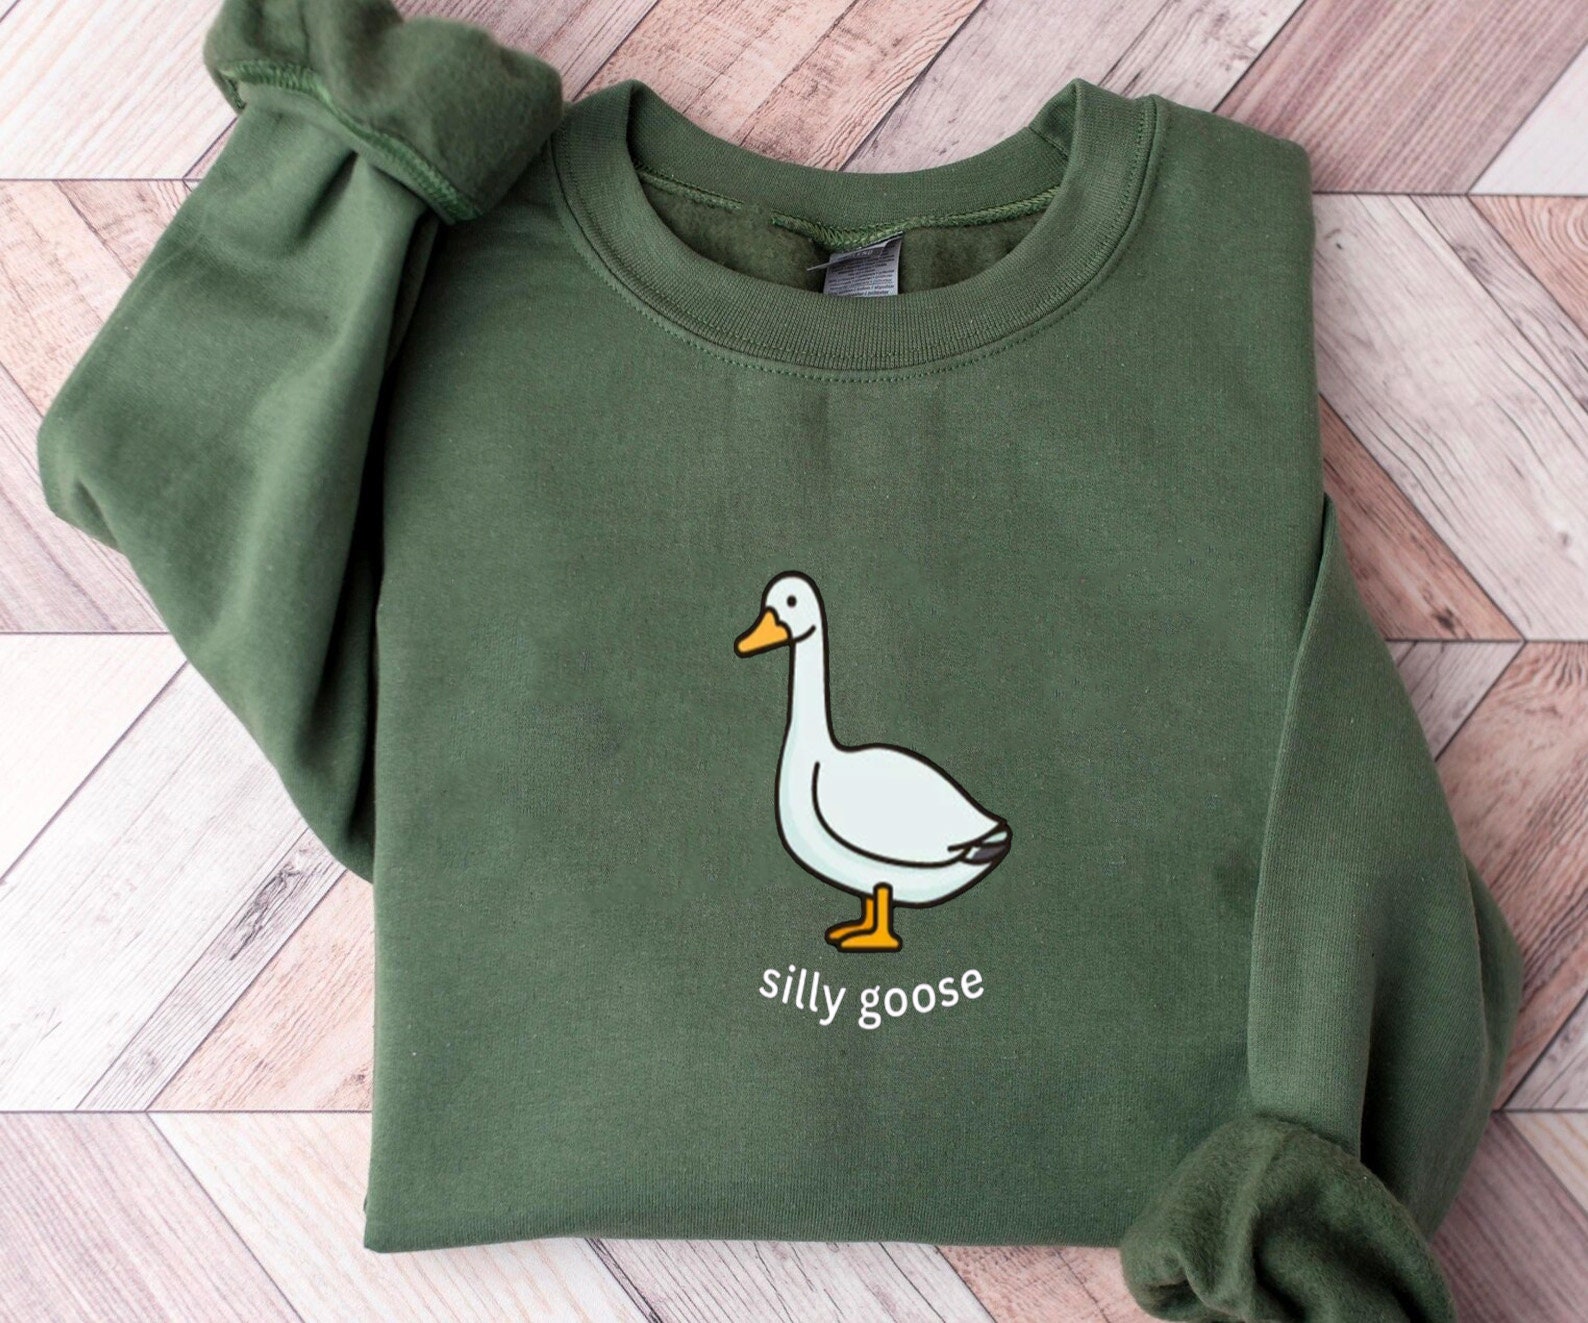 Discover Silly Goose Shirt/Sweatshirt/Hoodie, Goose Pullover, Funny Sweater